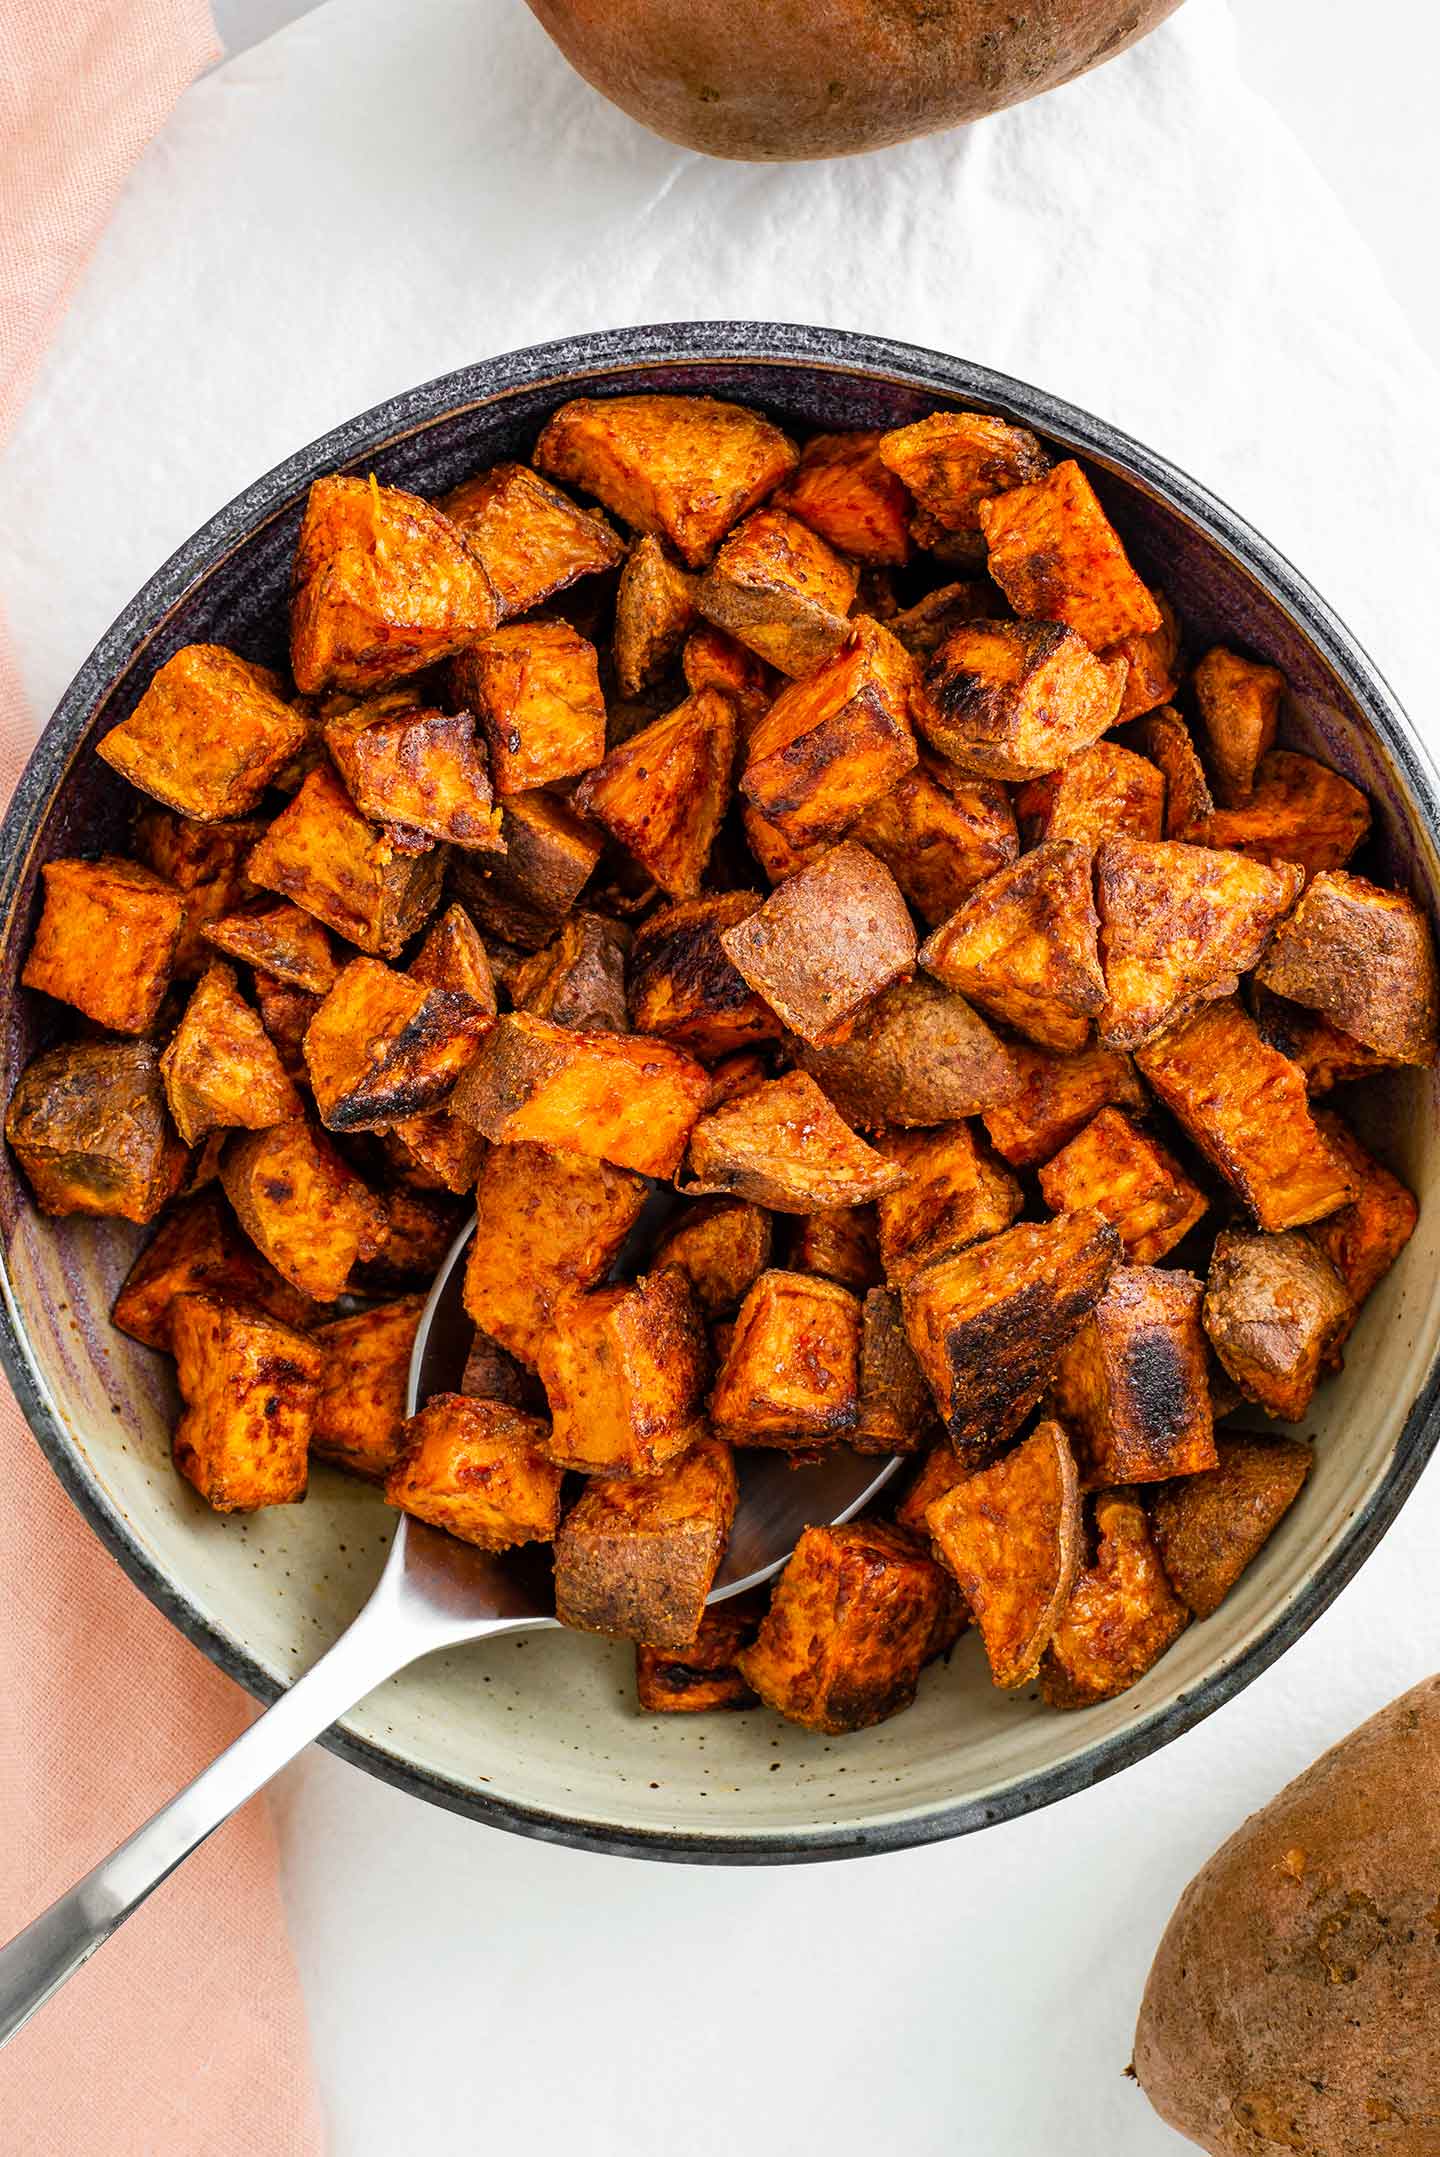 Roasted Sweet Potatoes With Chili Flakes and Fresh Herbs (Not